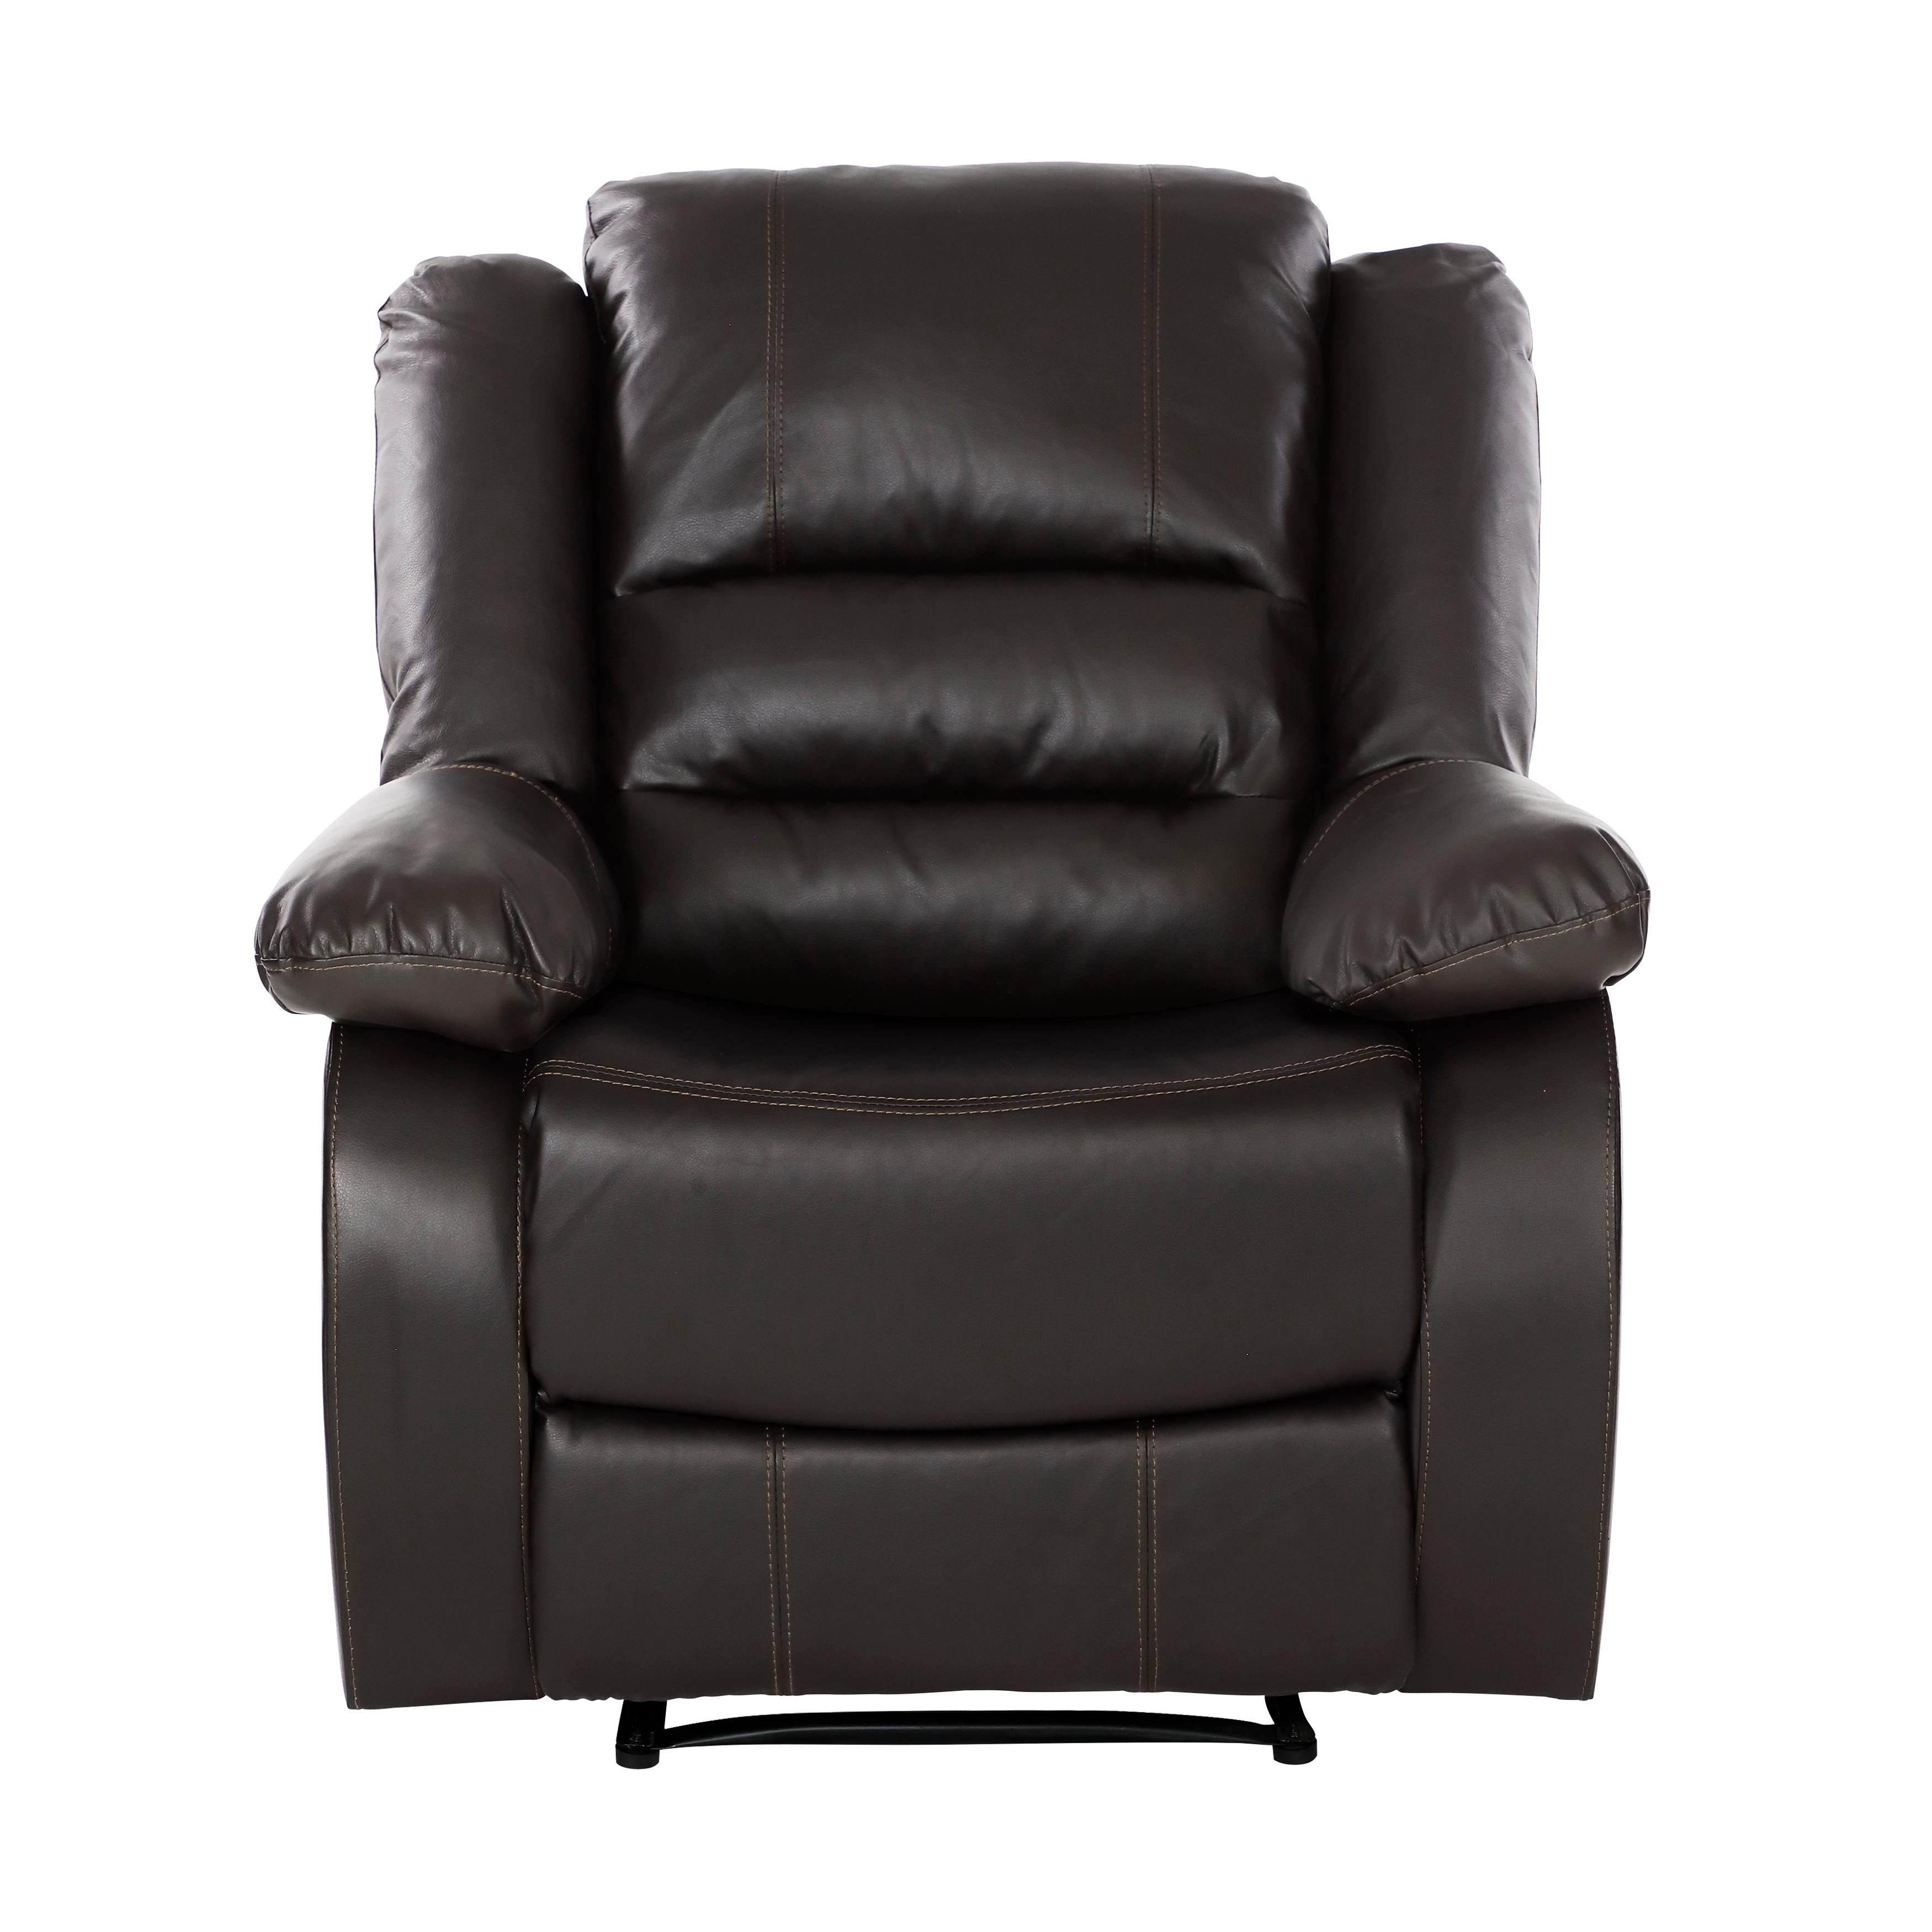 Transitional Recliner Chair Jarita Recliner Chair 8329BRW-1-C 8329BRW-1-C in Brown Faux Leather